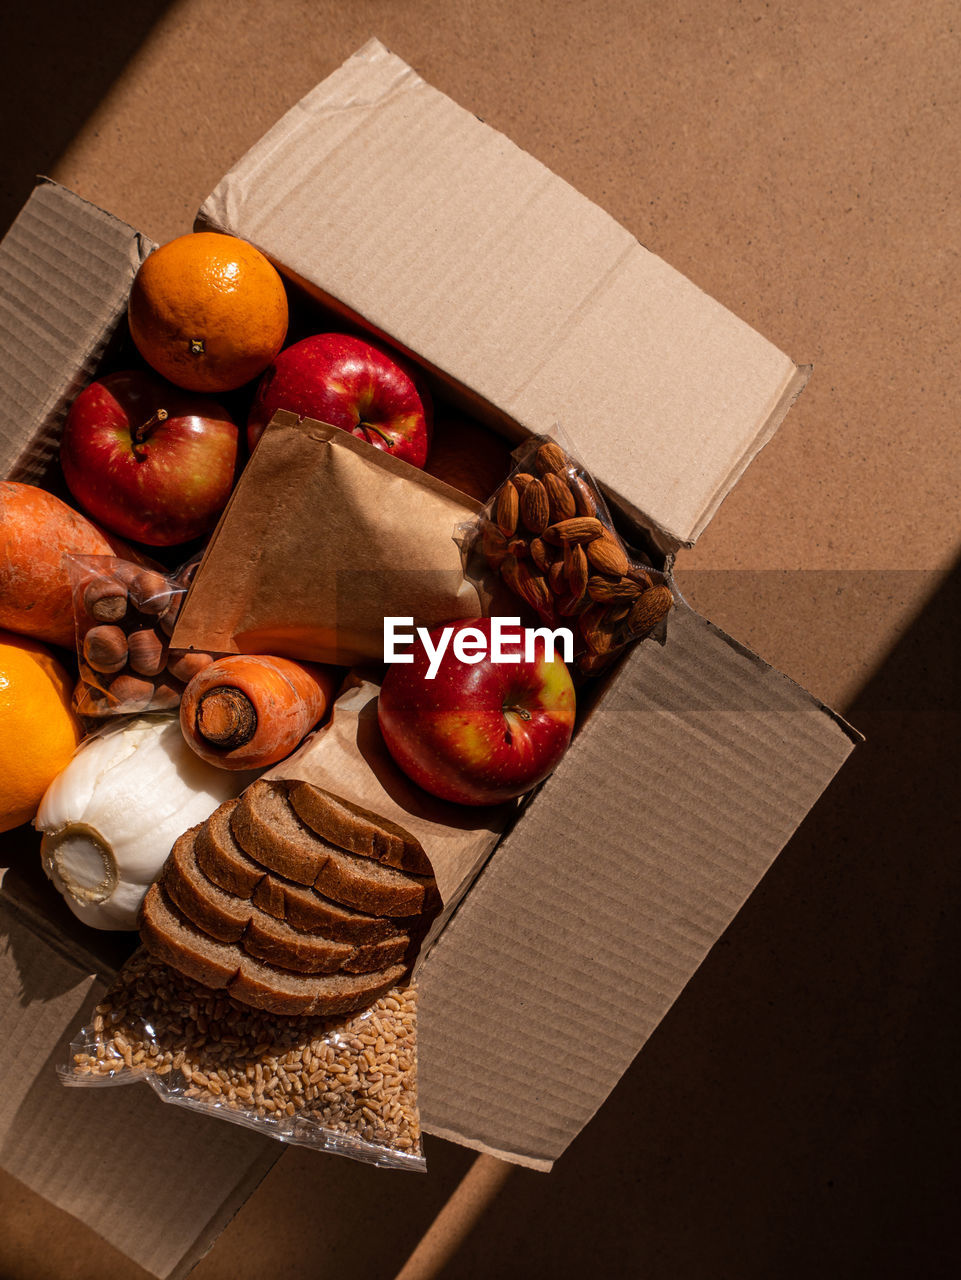 Healthy food delivery box with harsh shadow new normal online shopping supermarket take away service